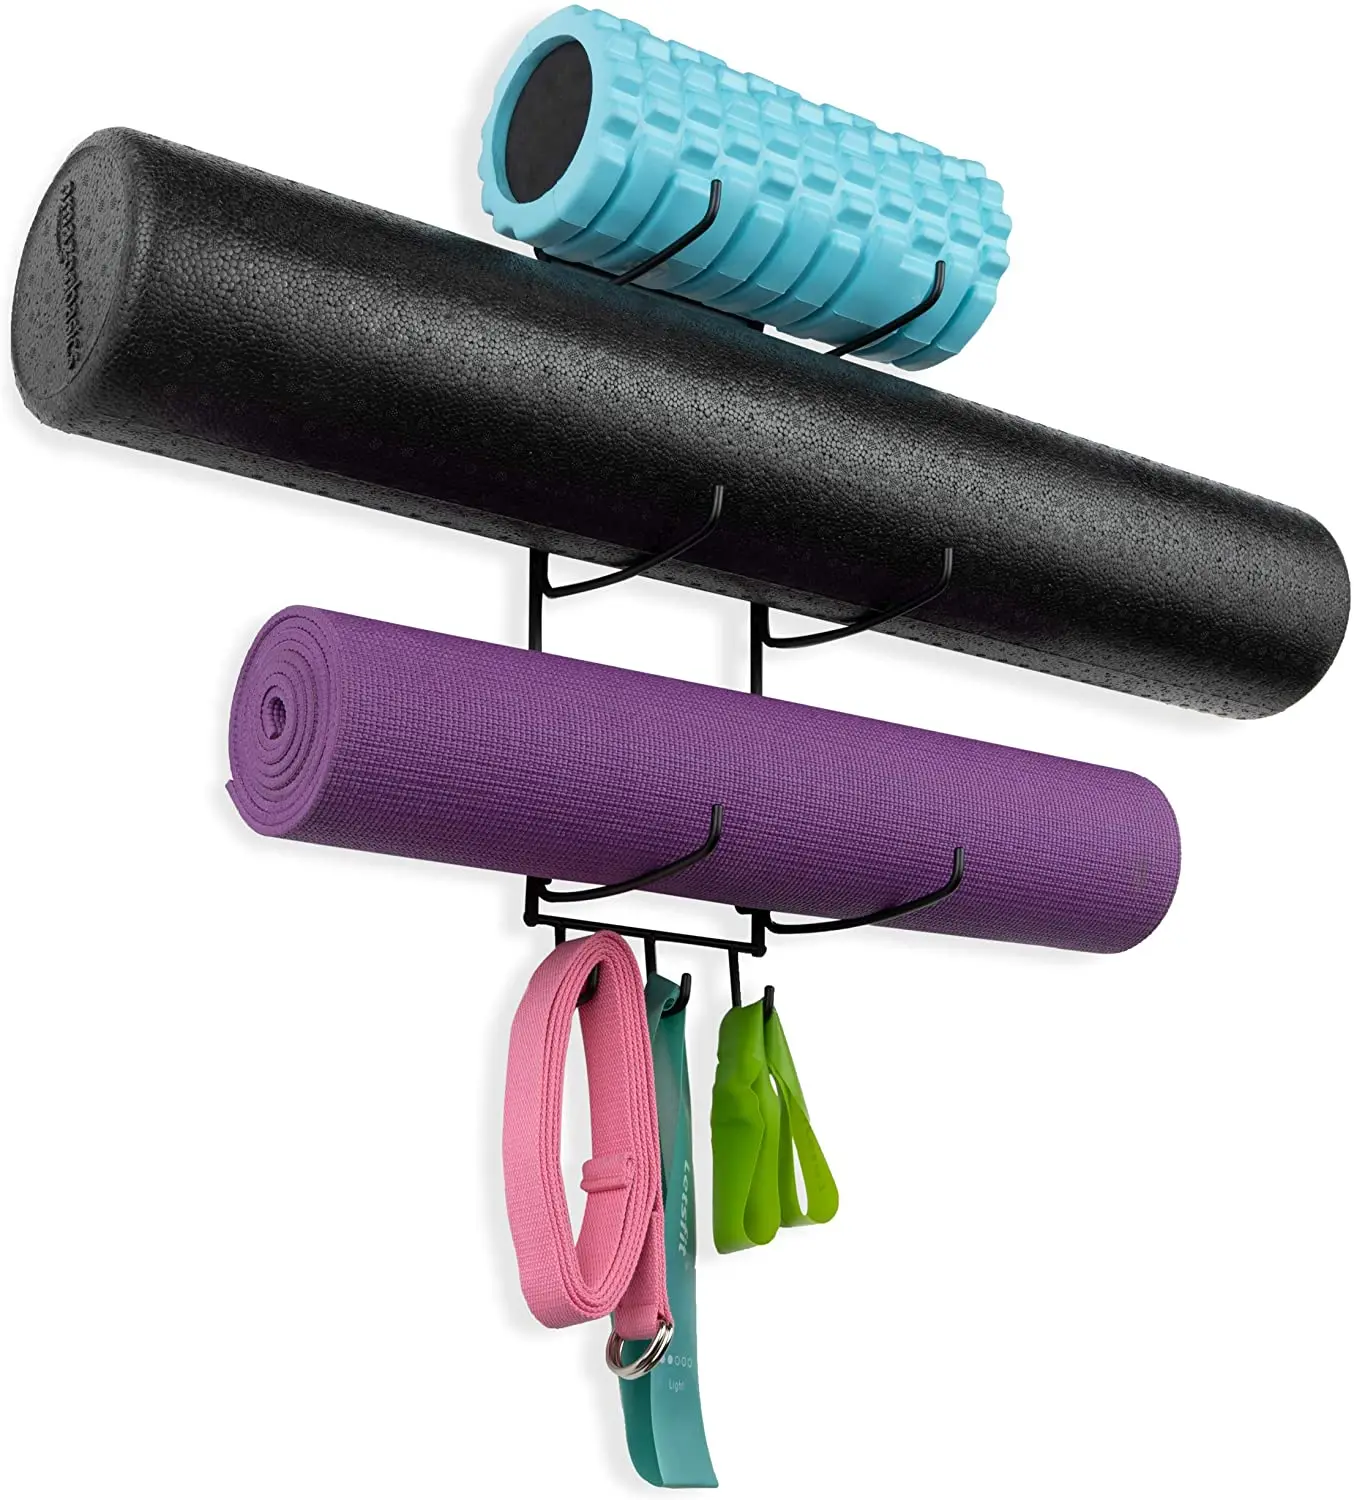 Yoga Mat Holder,Towel Rack With Hooks Yoga Strap,Resistance Bands For Home Gym Studio,3-tier Metal Black - Buy Yoga Mat Holder,Yoga Rack,Towel Rack With Hooks Product on Alibaba.com